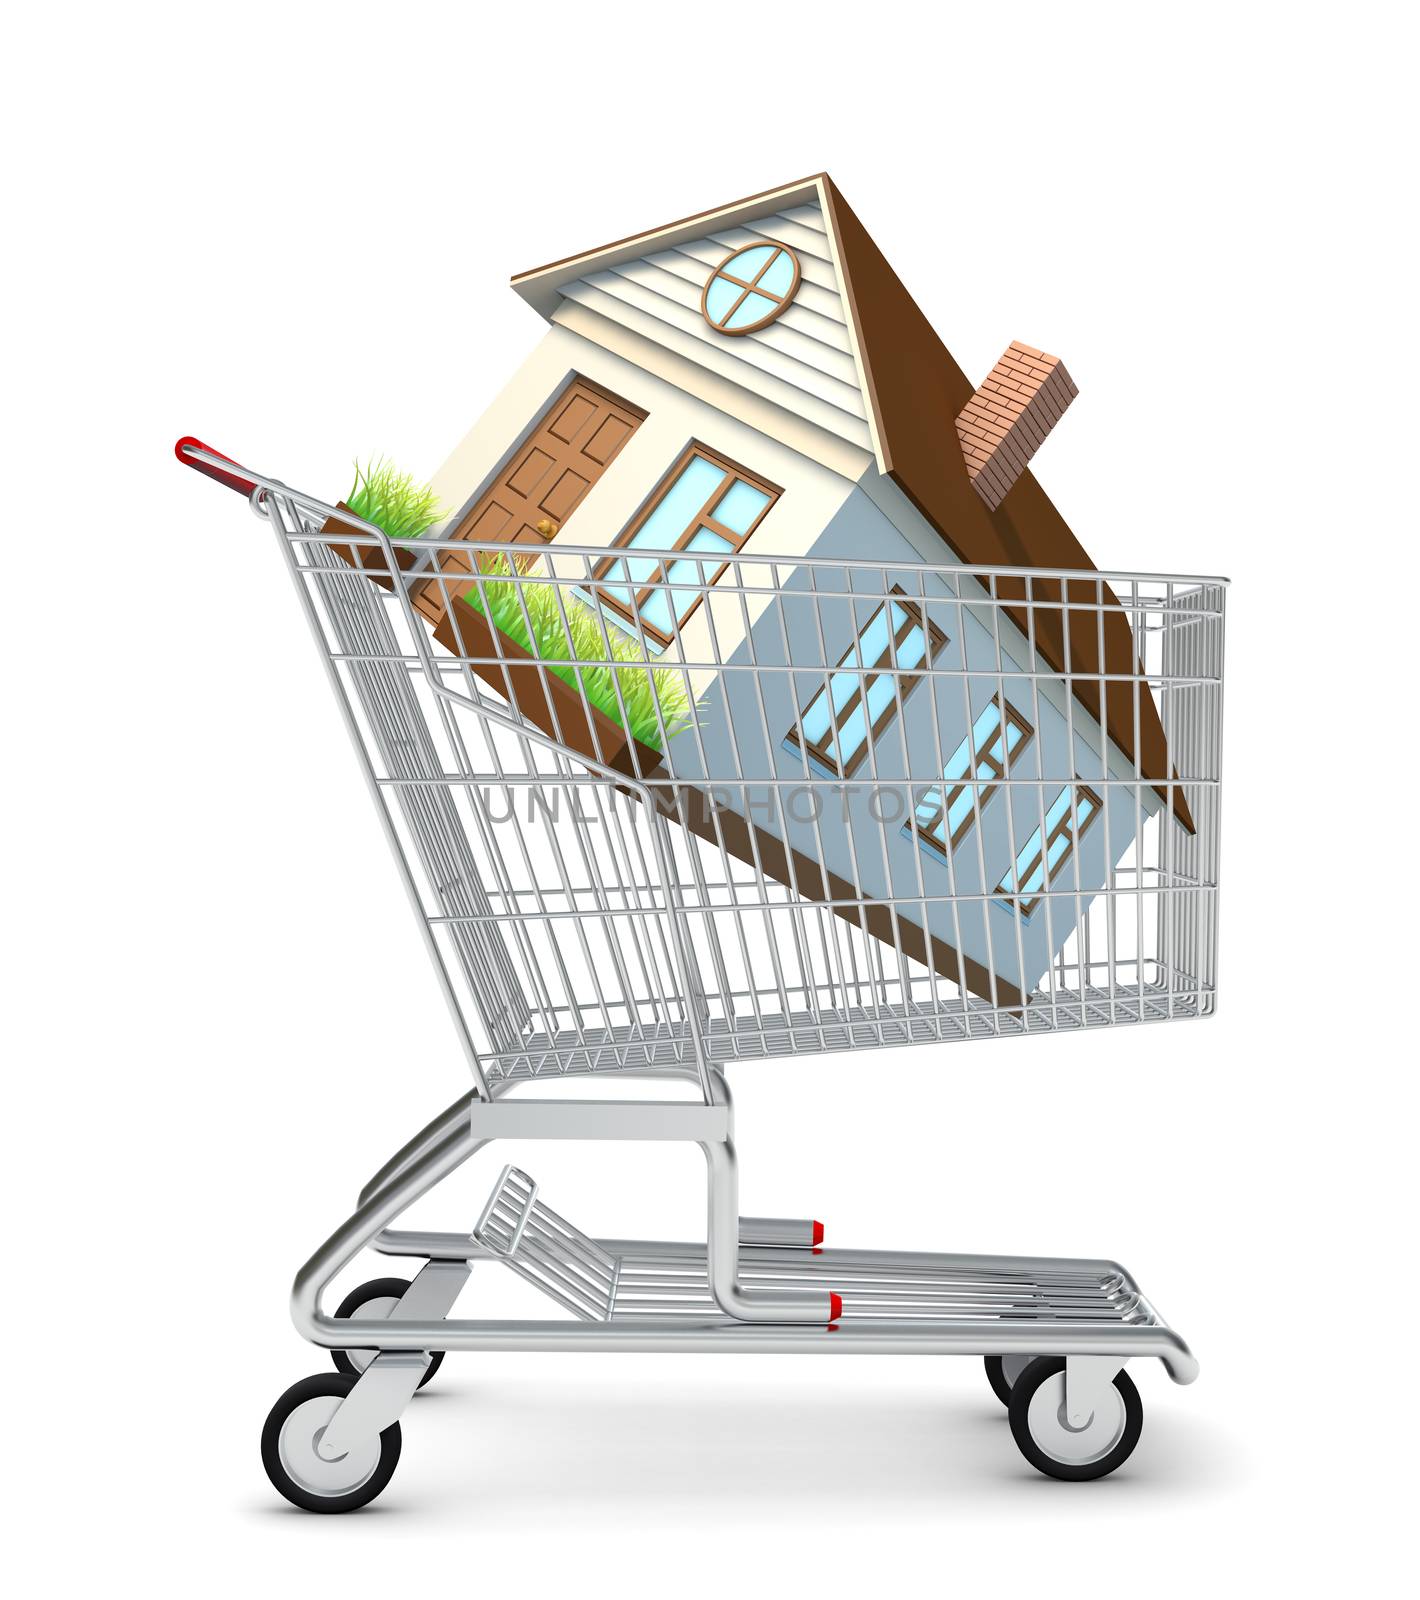 House in shopping cart on isolated white background